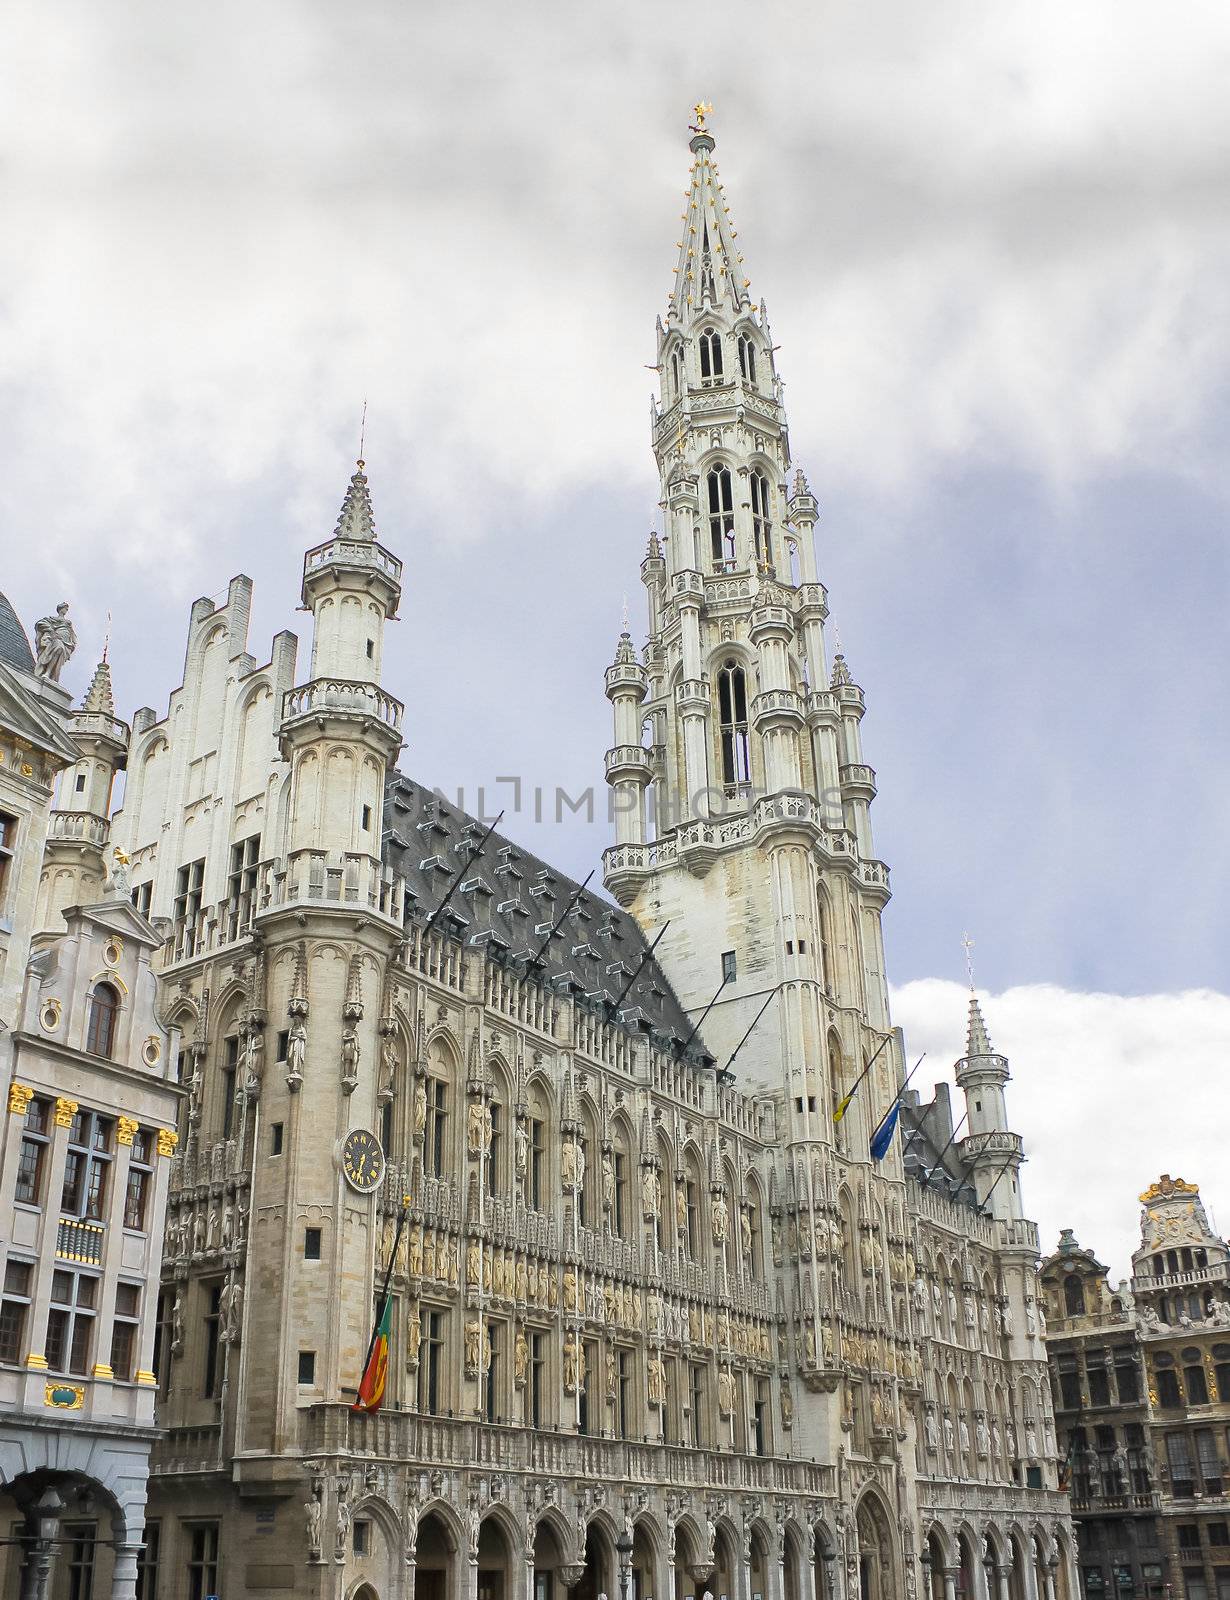 Grand Place and Grote Markt in Brussels, Belgium  by NickNick